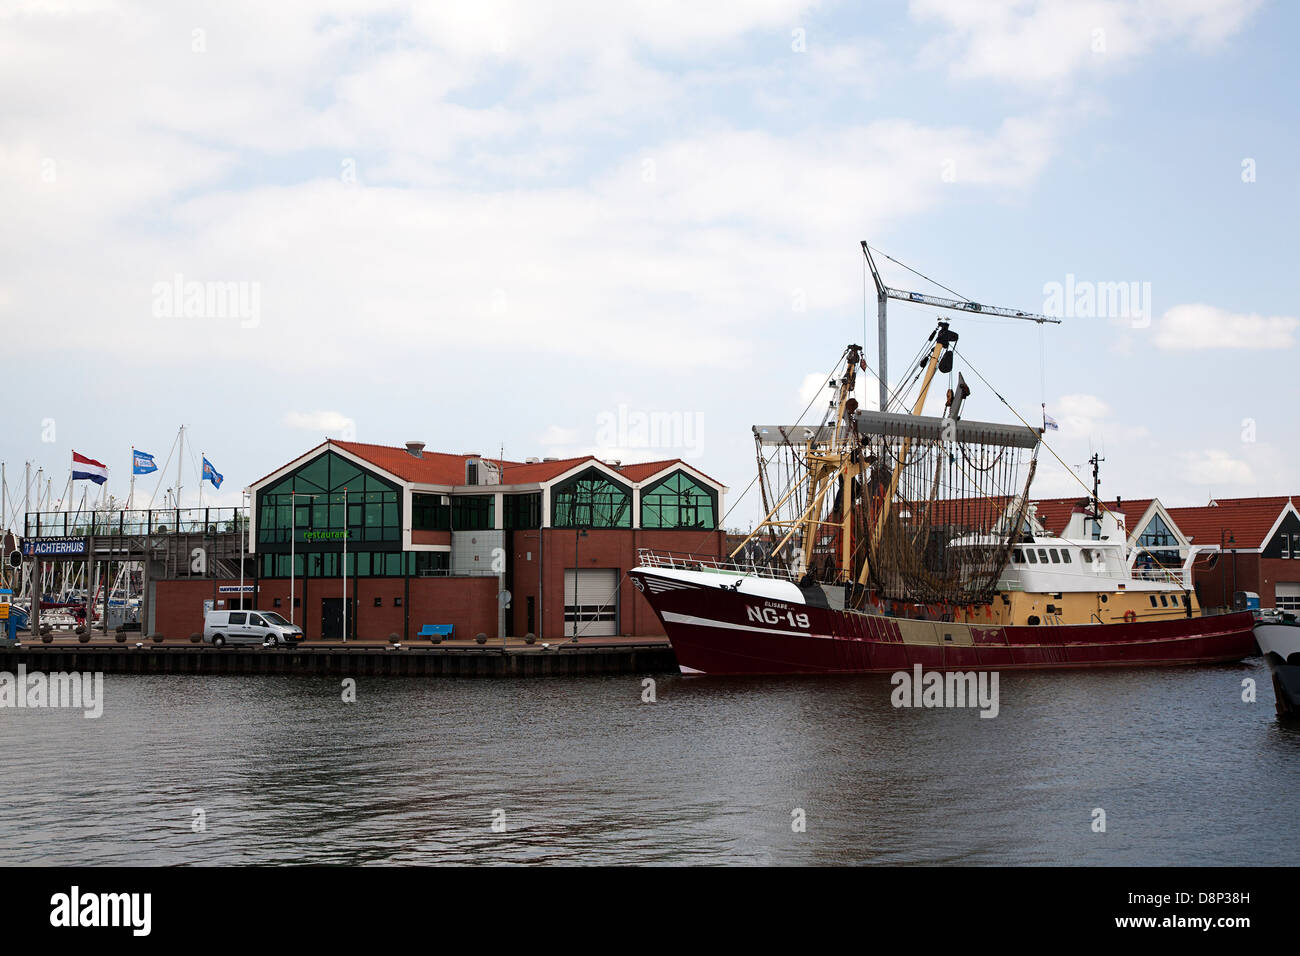 Fishing boat in the harbor of the fishing village Urk, Flevoland, The Netherlands Stock Photo